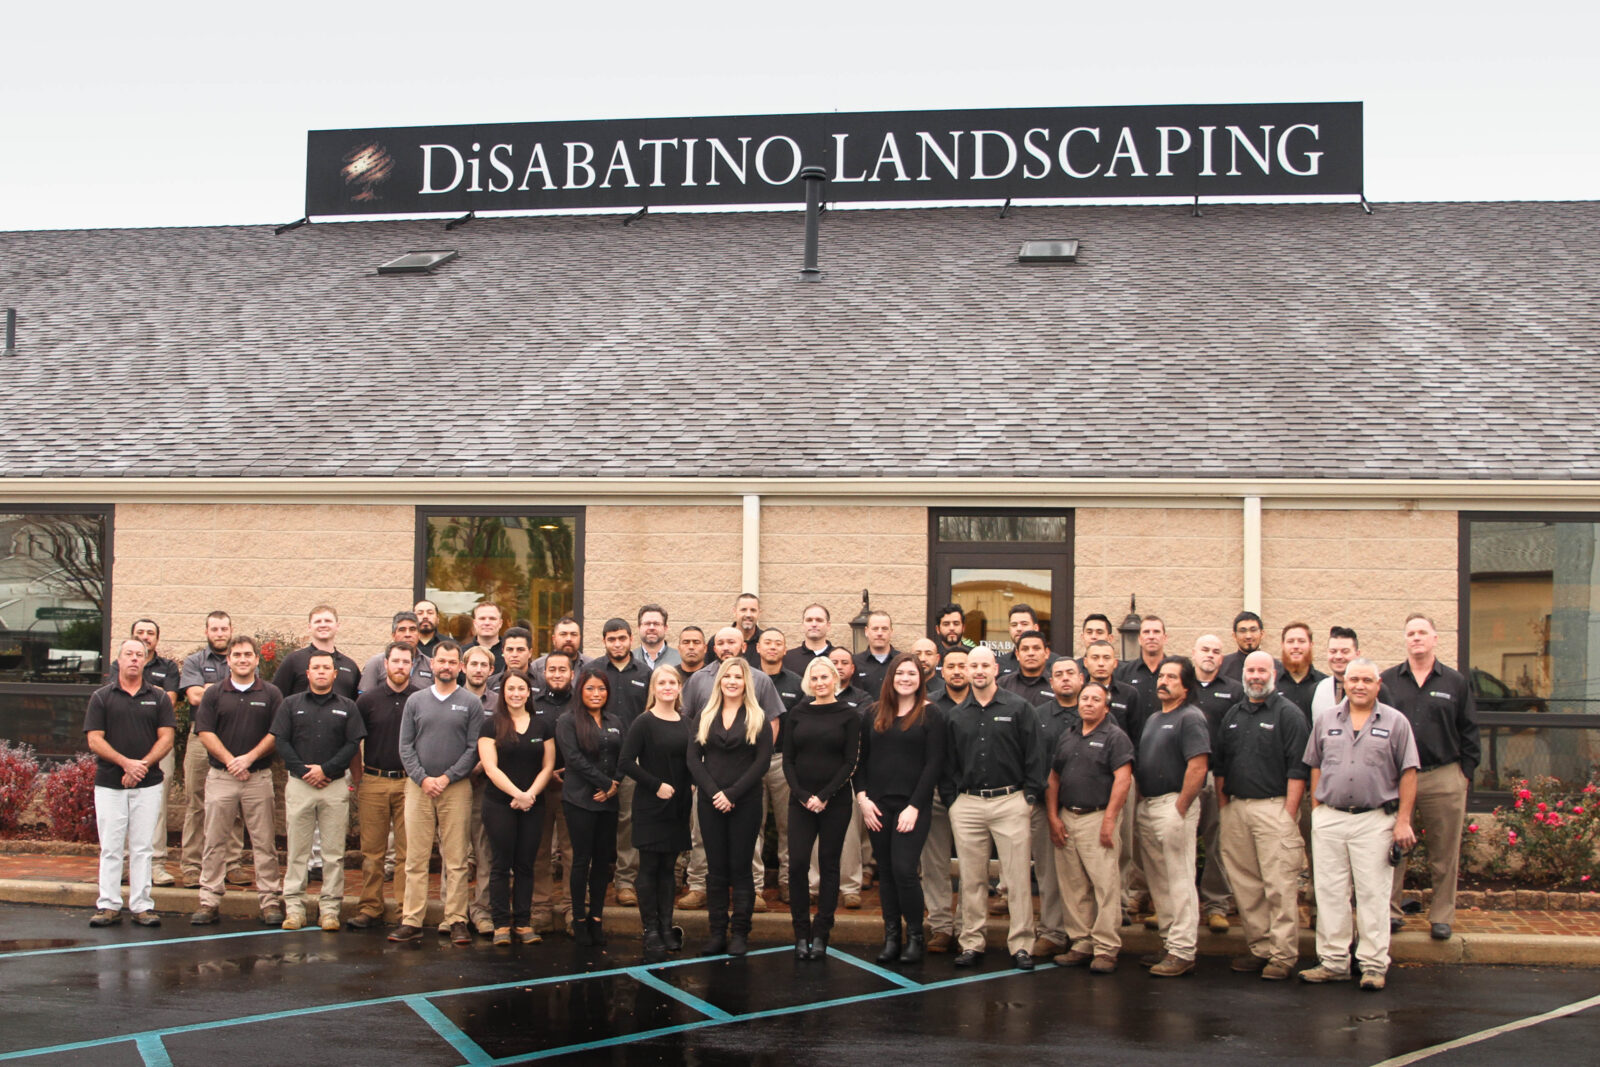 How DiSabatino Landscaping and Esposito Masonry Merged Their Skills to Create Beautiful Outdoor Spaces